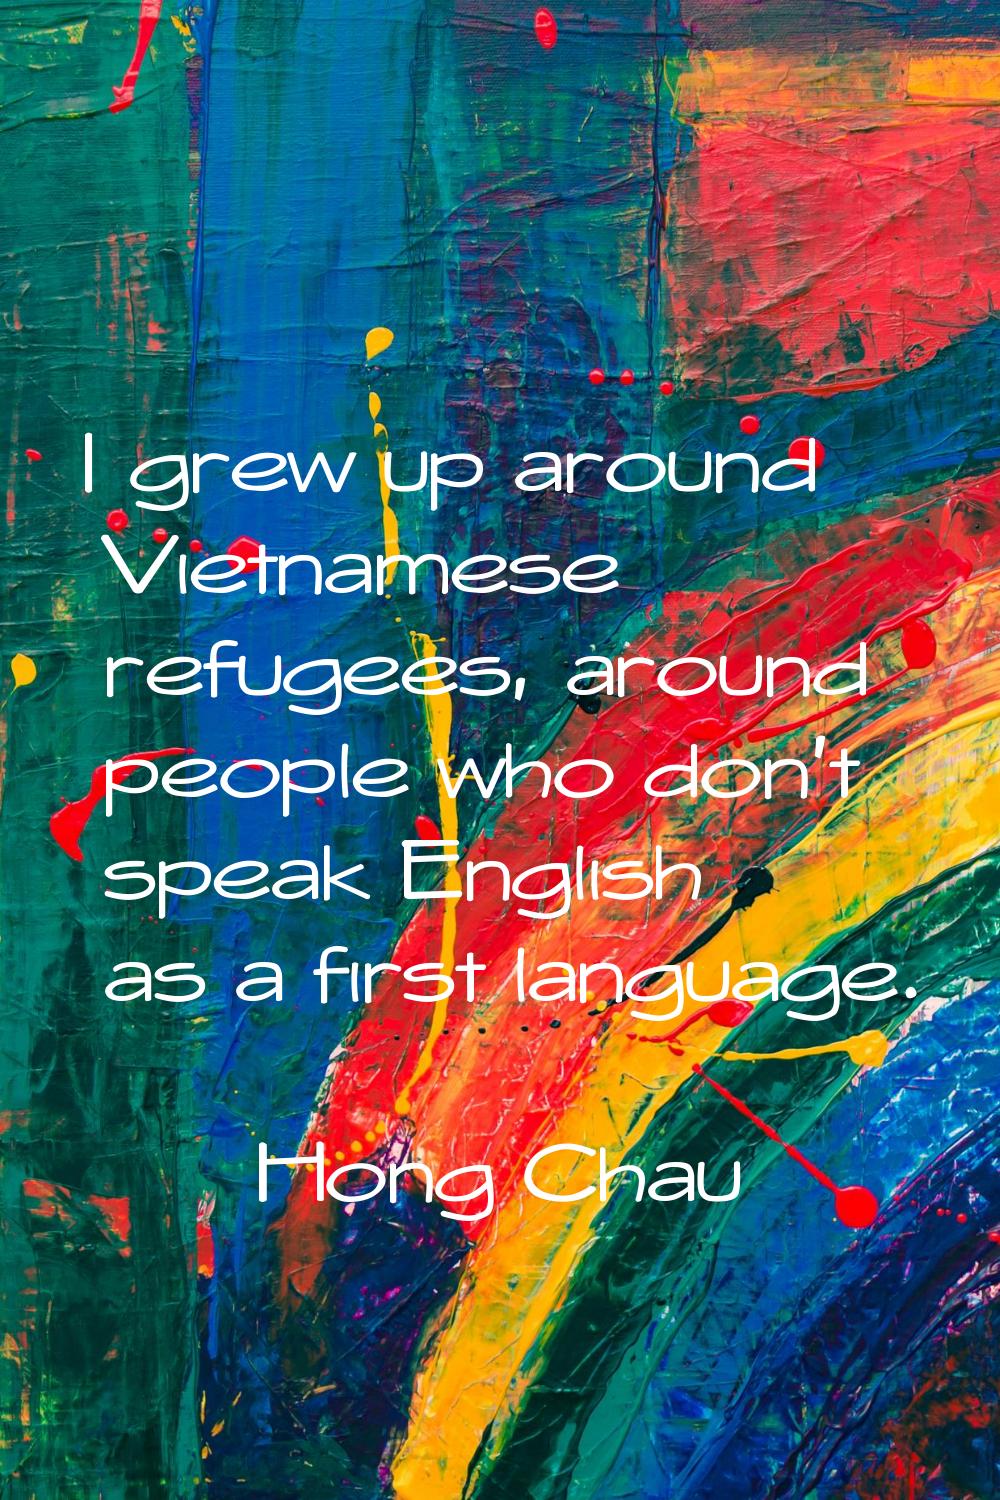 I grew up around Vietnamese refugees, around people who don't speak English as a first language.